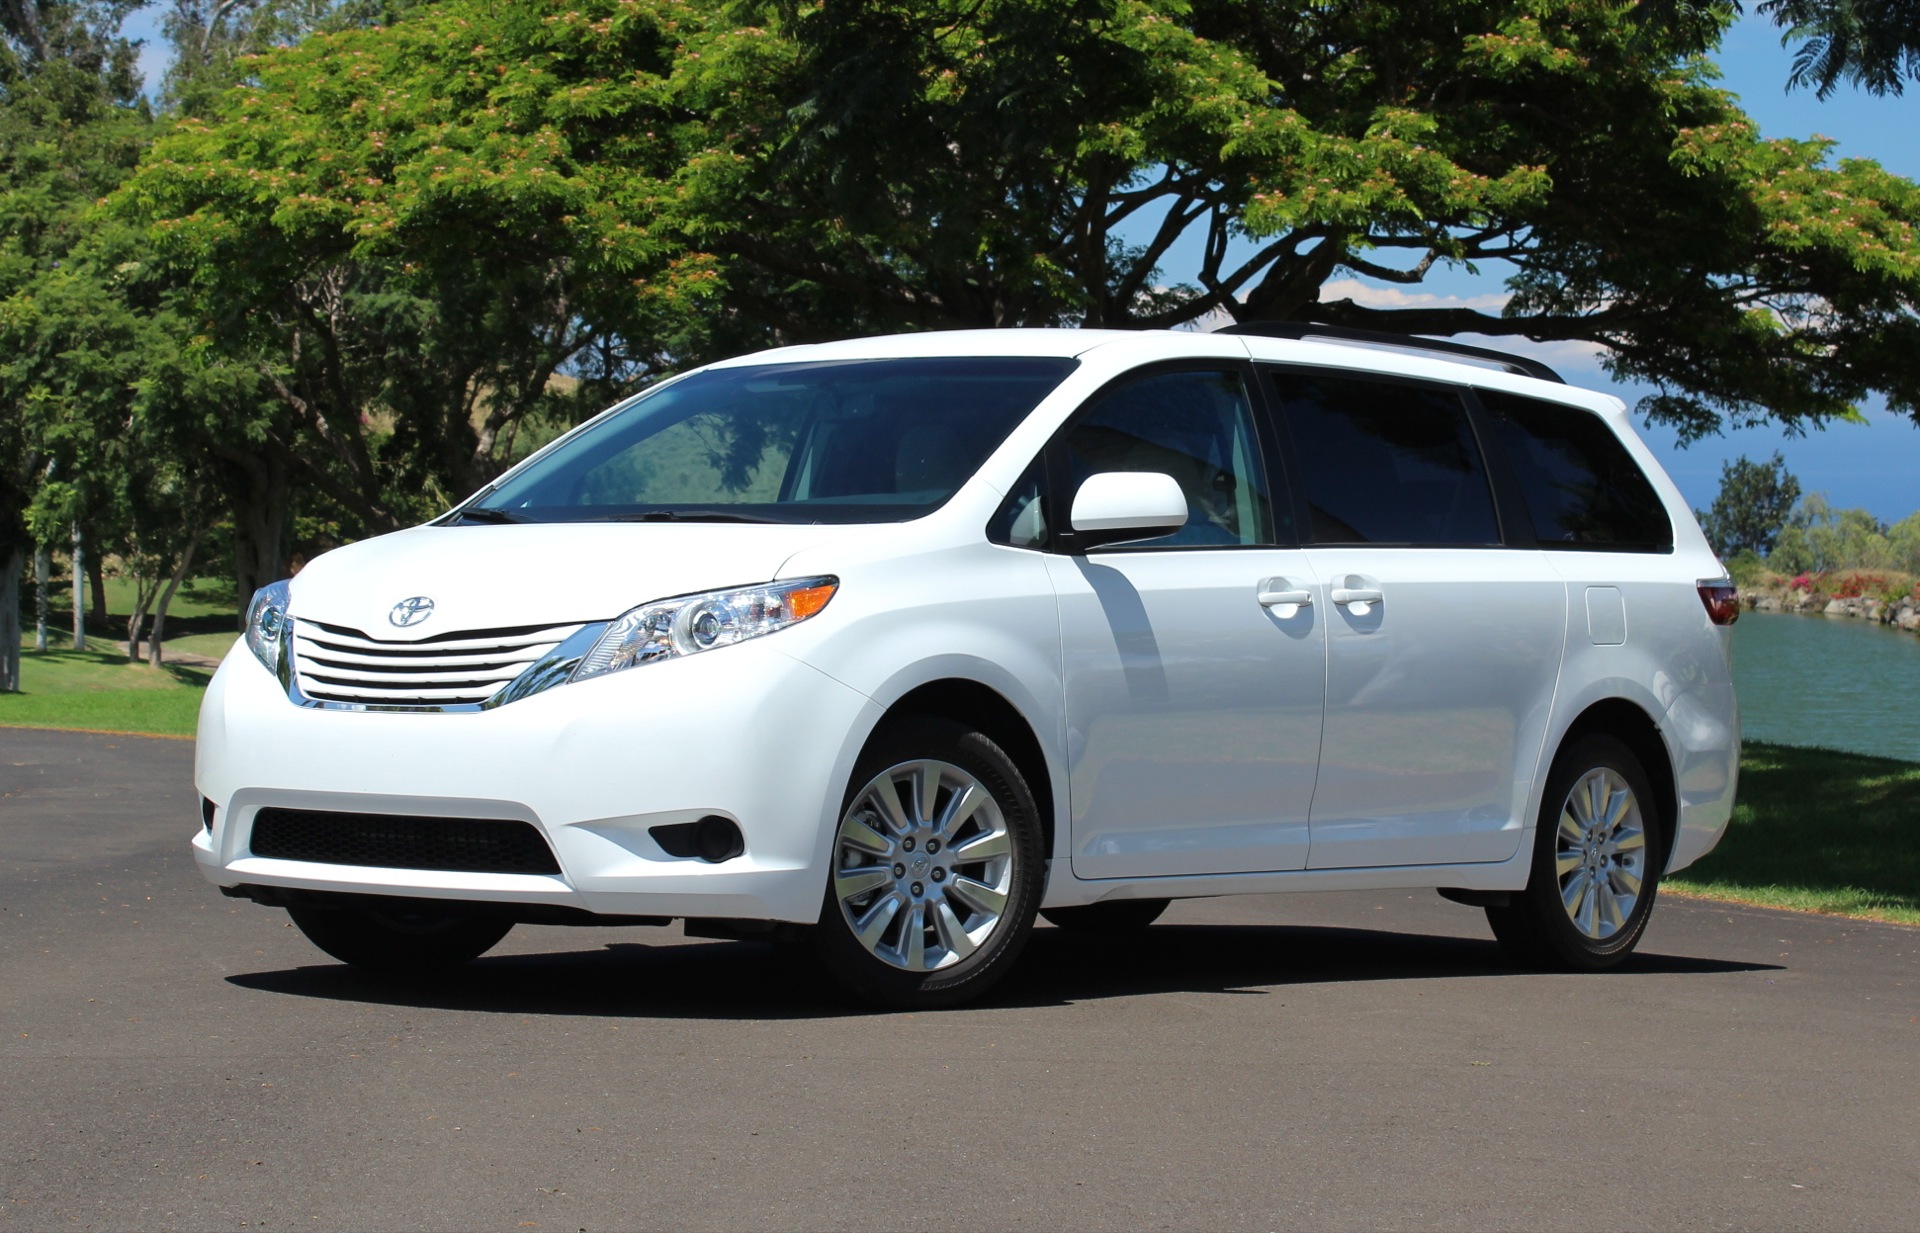 The Car Connection's Best Minivans To Buy 20151920 x 1233